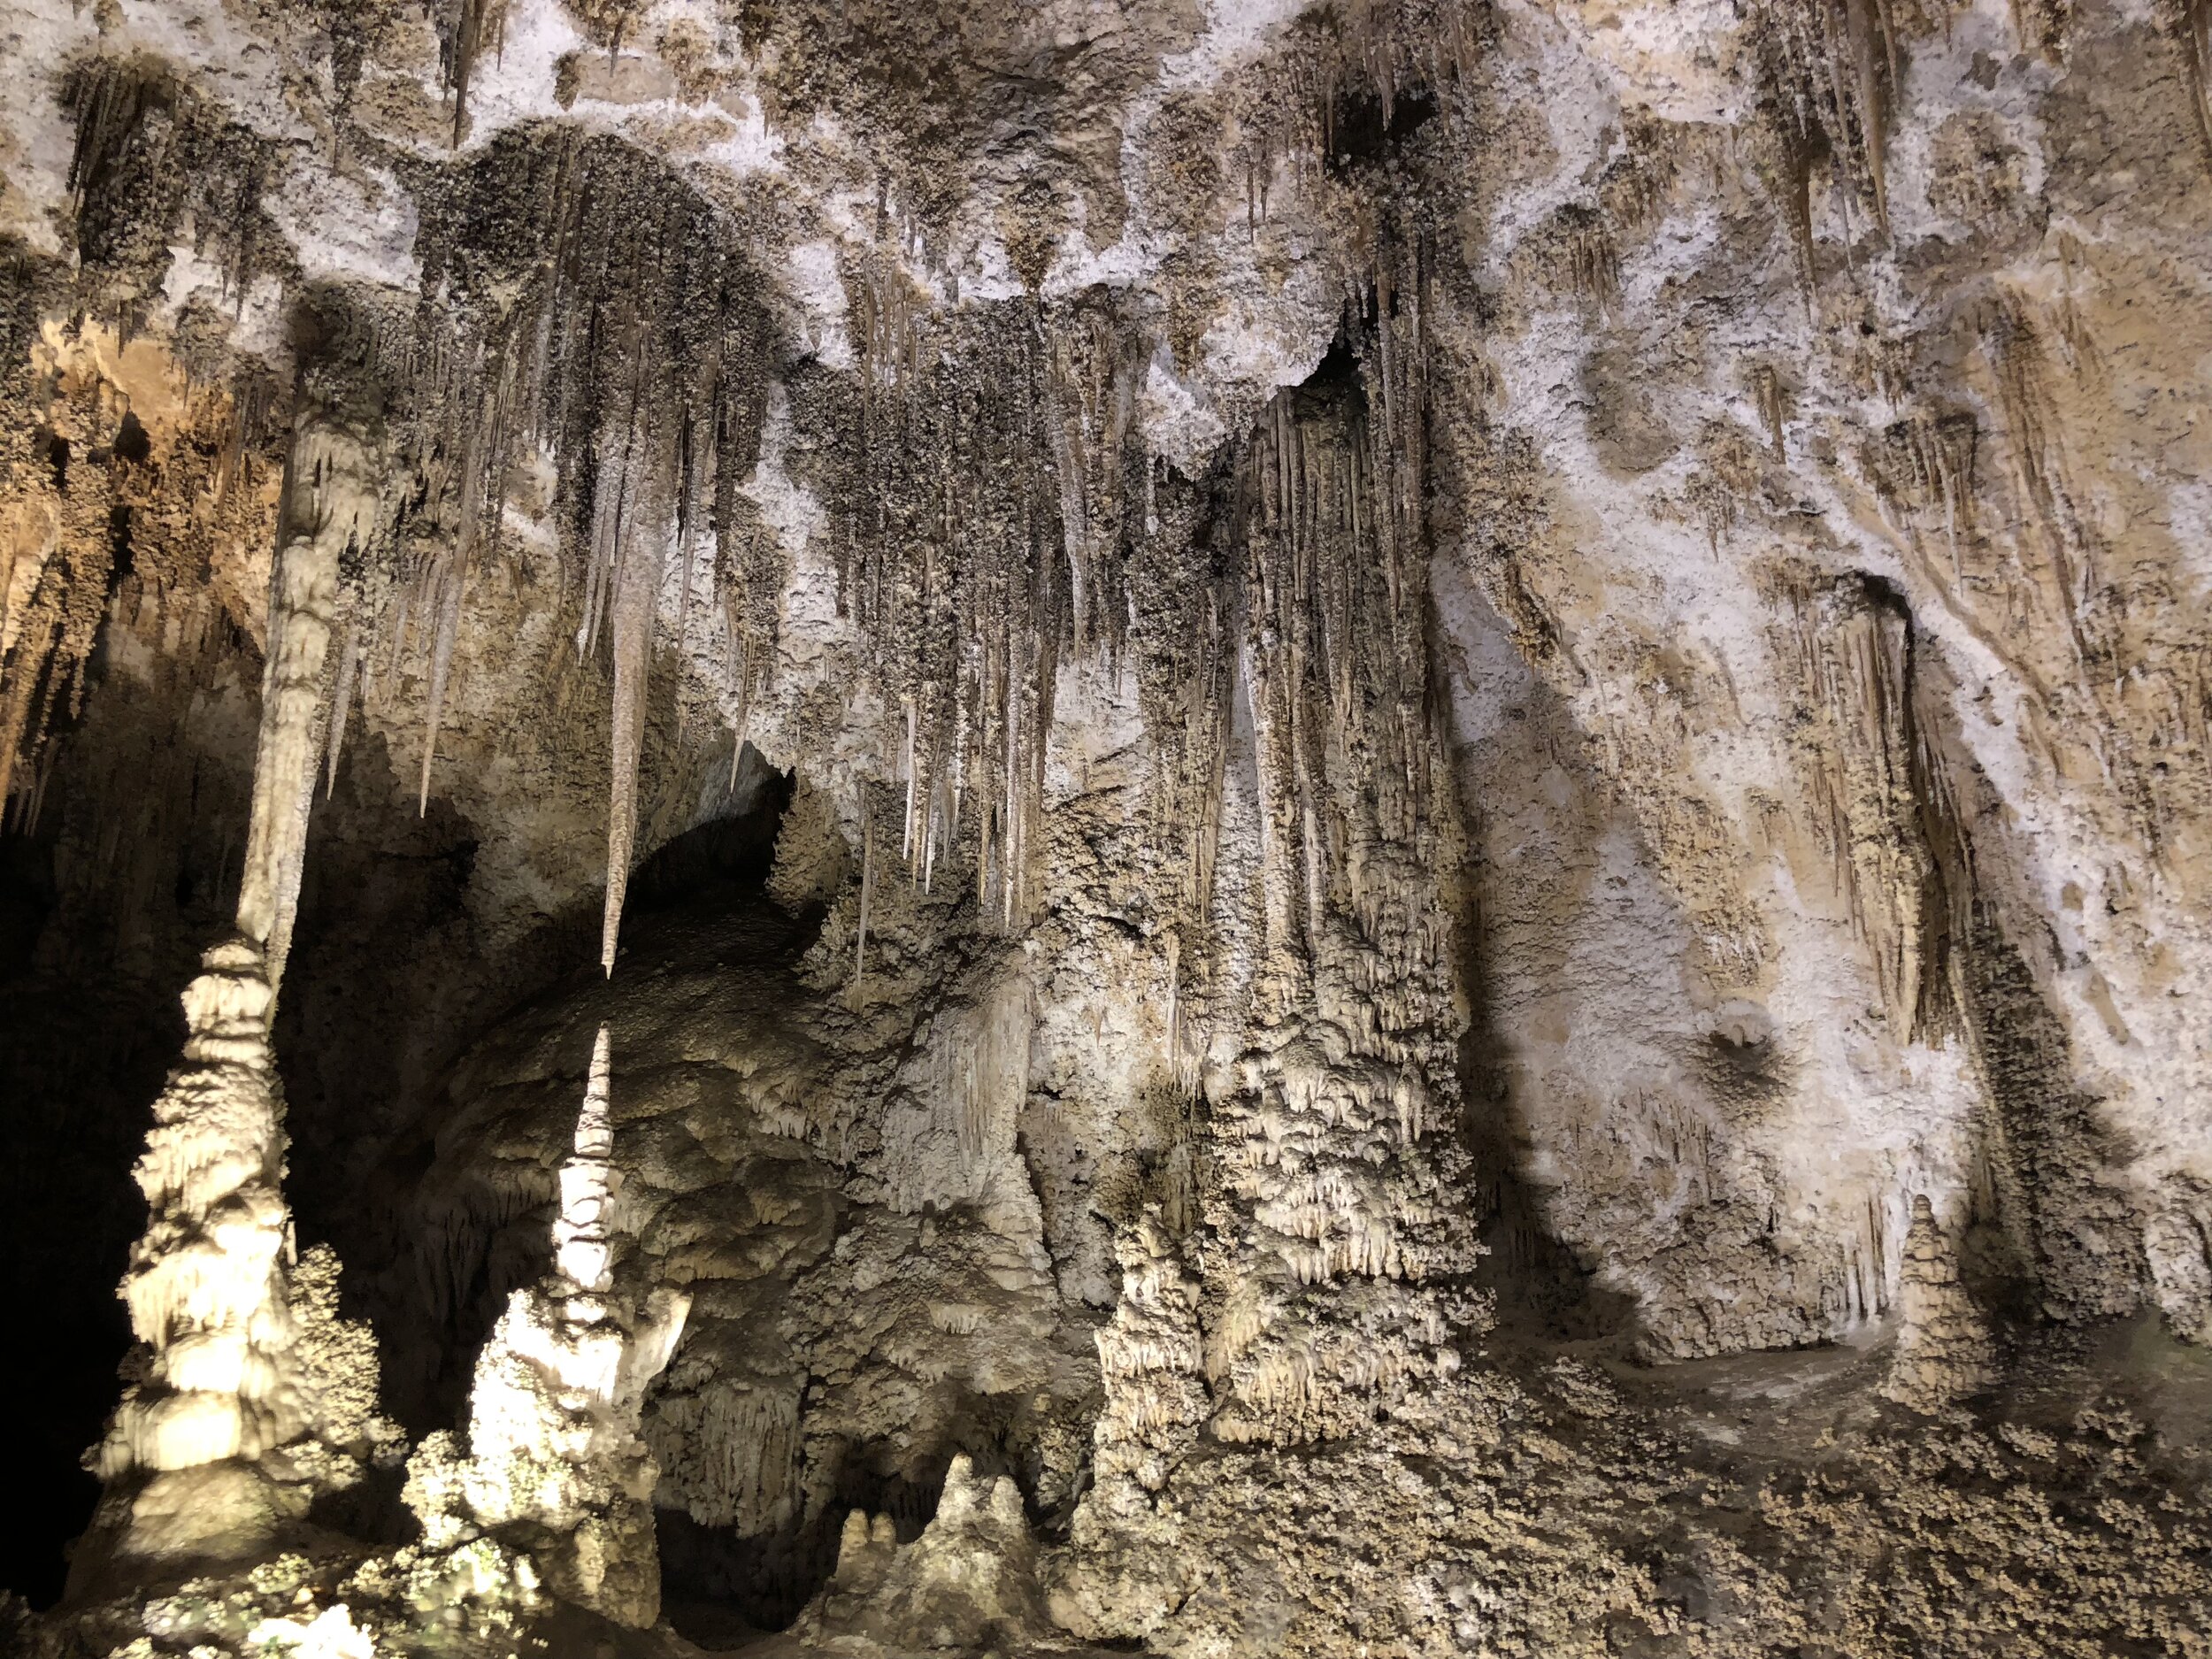 Congress established Carlsbad Caverns National Park in 1930; it was recognized as a World Heritage Site in 1995.